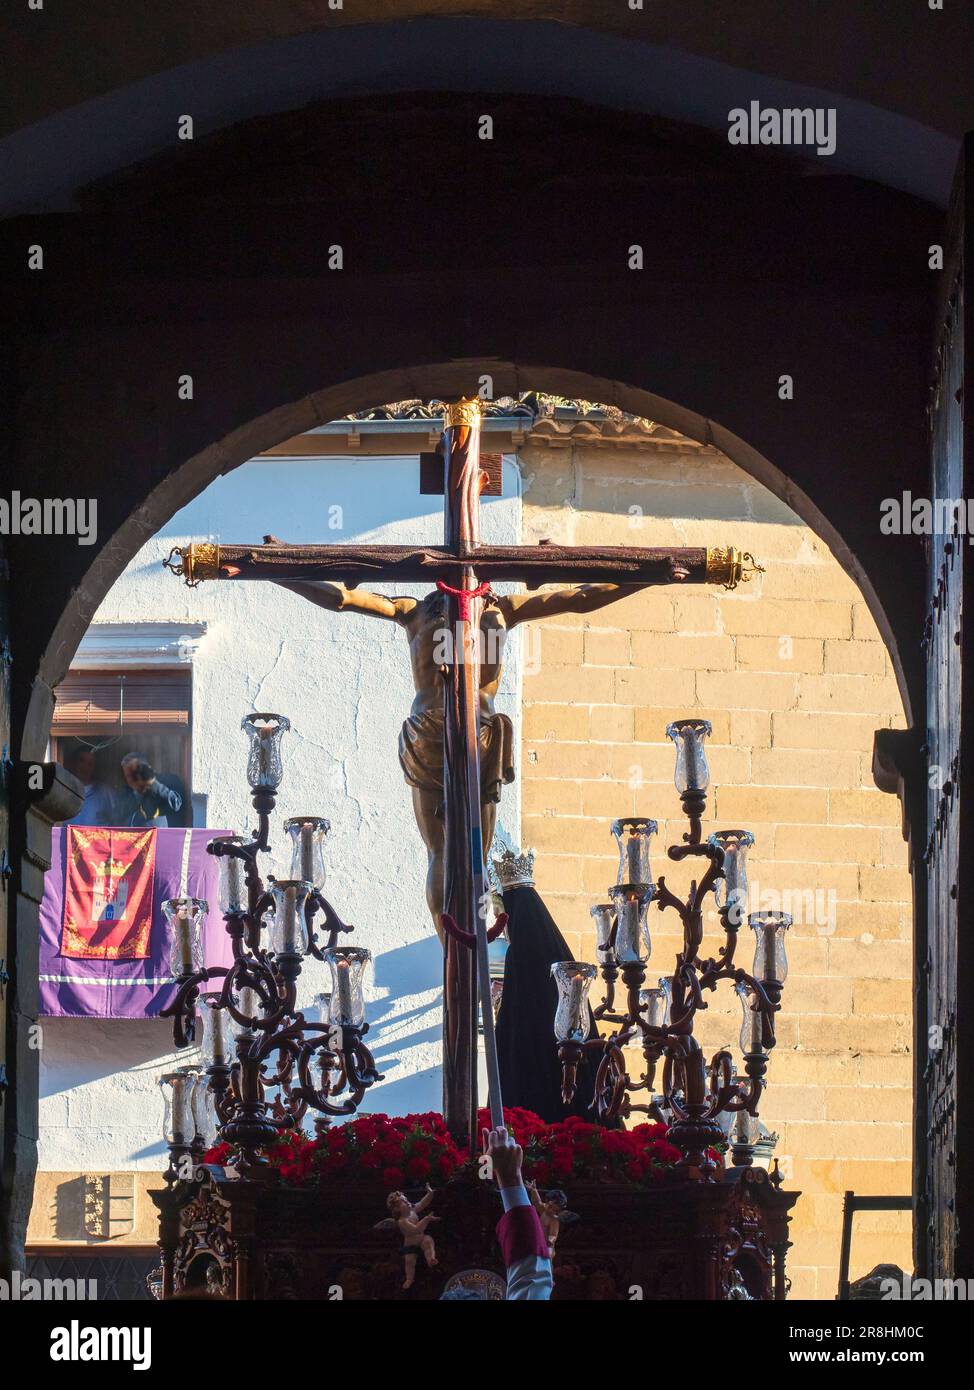 The throne with the figure of Jesus Christ on the cross next to the Virgin Mary, leaving the church during the celebration of the Holy Week in Baeza. Stock Photo